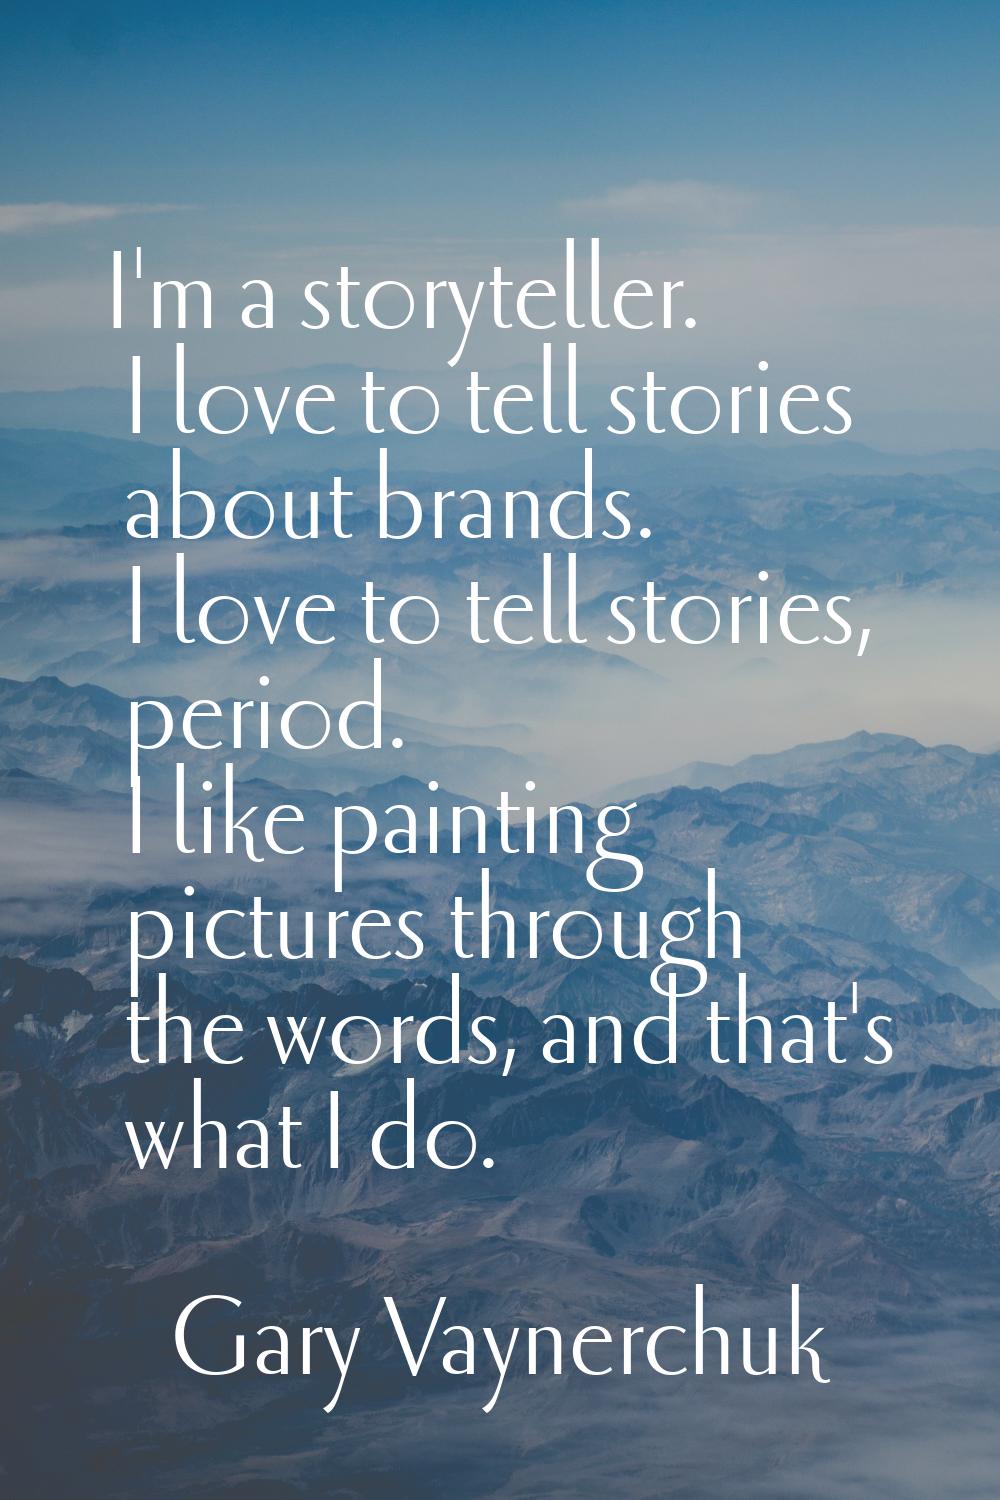 I'm a storyteller. I love to tell stories about brands. I love to tell stories, period. I like pain